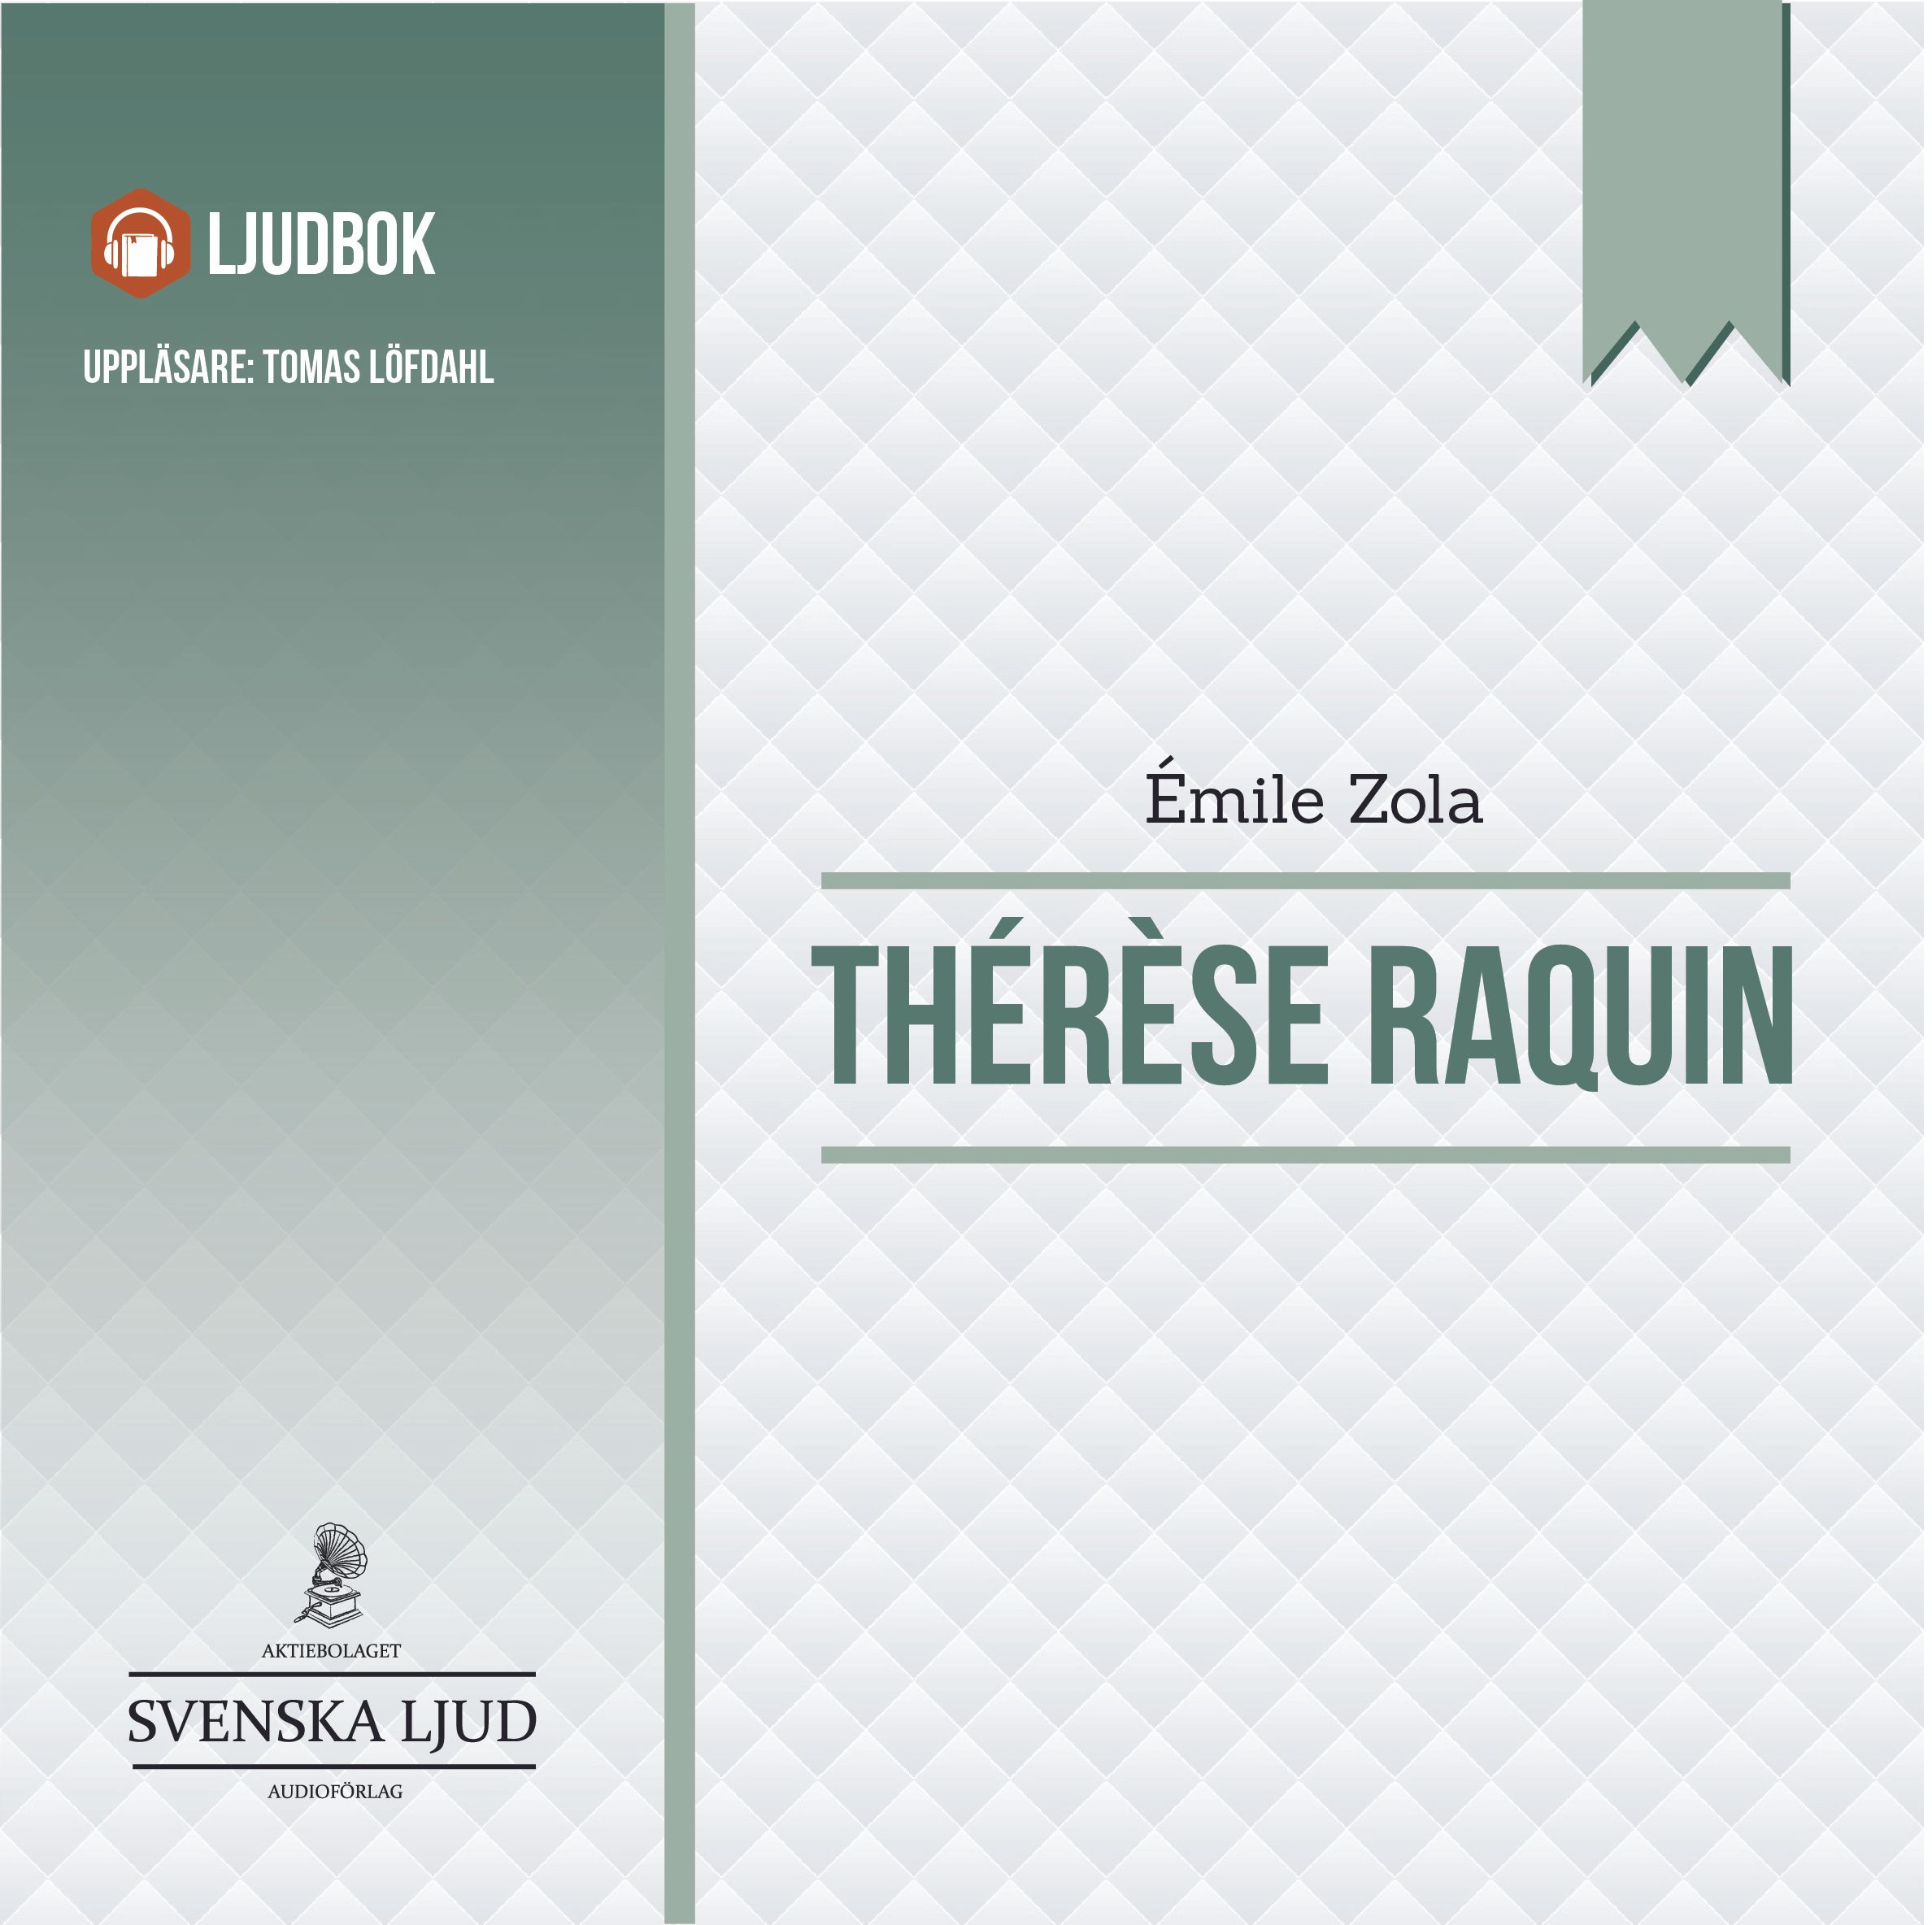 Therese Raquin, audiobook by Emile Zola